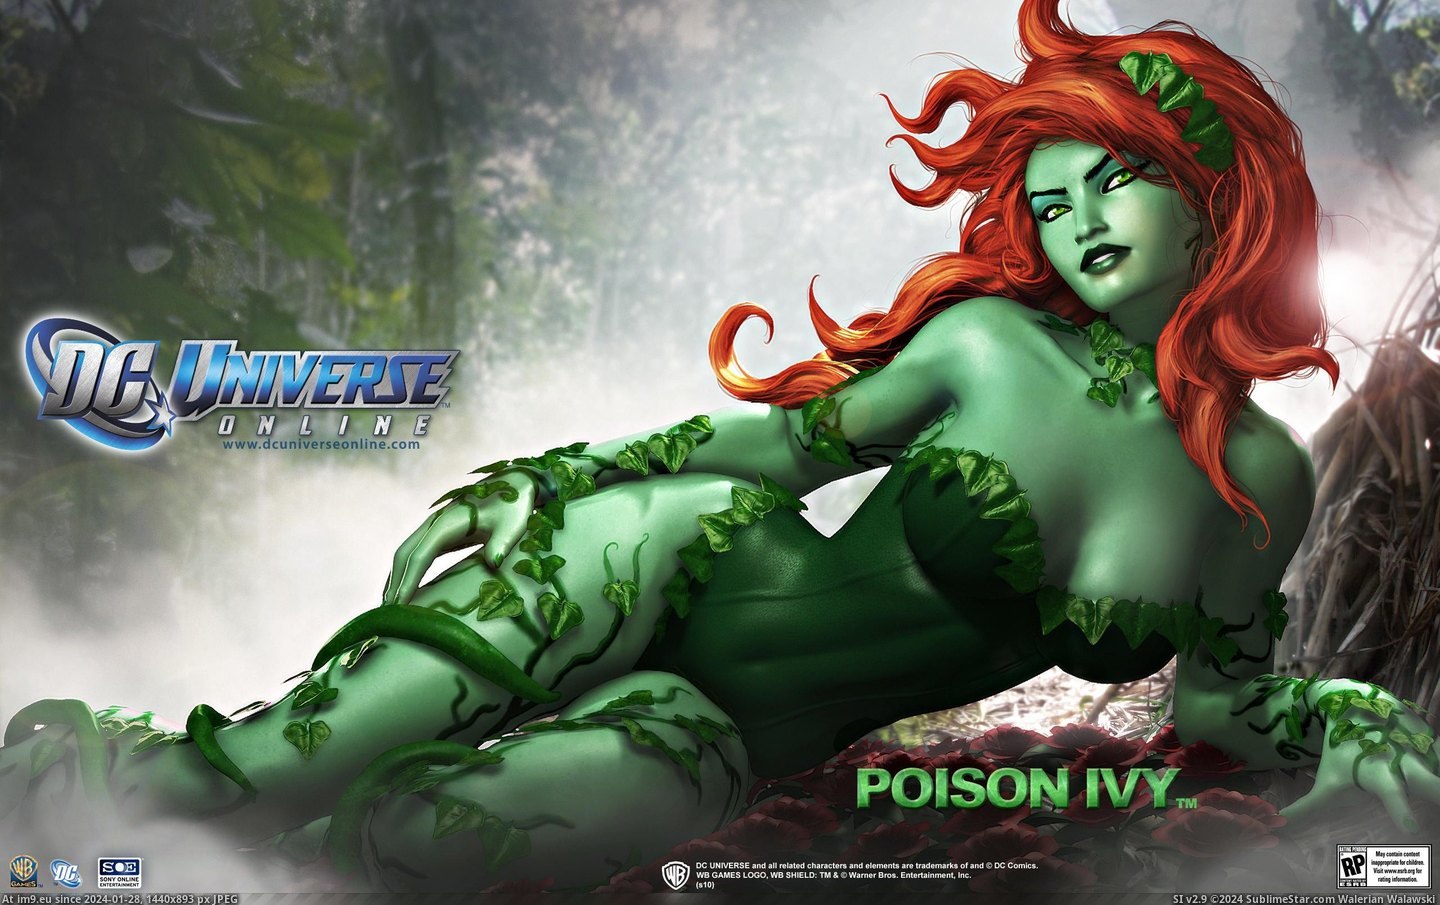 #Wallpaper #Wide #Universe #Poison #Ivy Dc Universe Poison Ivy Wide HD Wallpaper Pic. (Bild von album Unique HD Wallpapers))